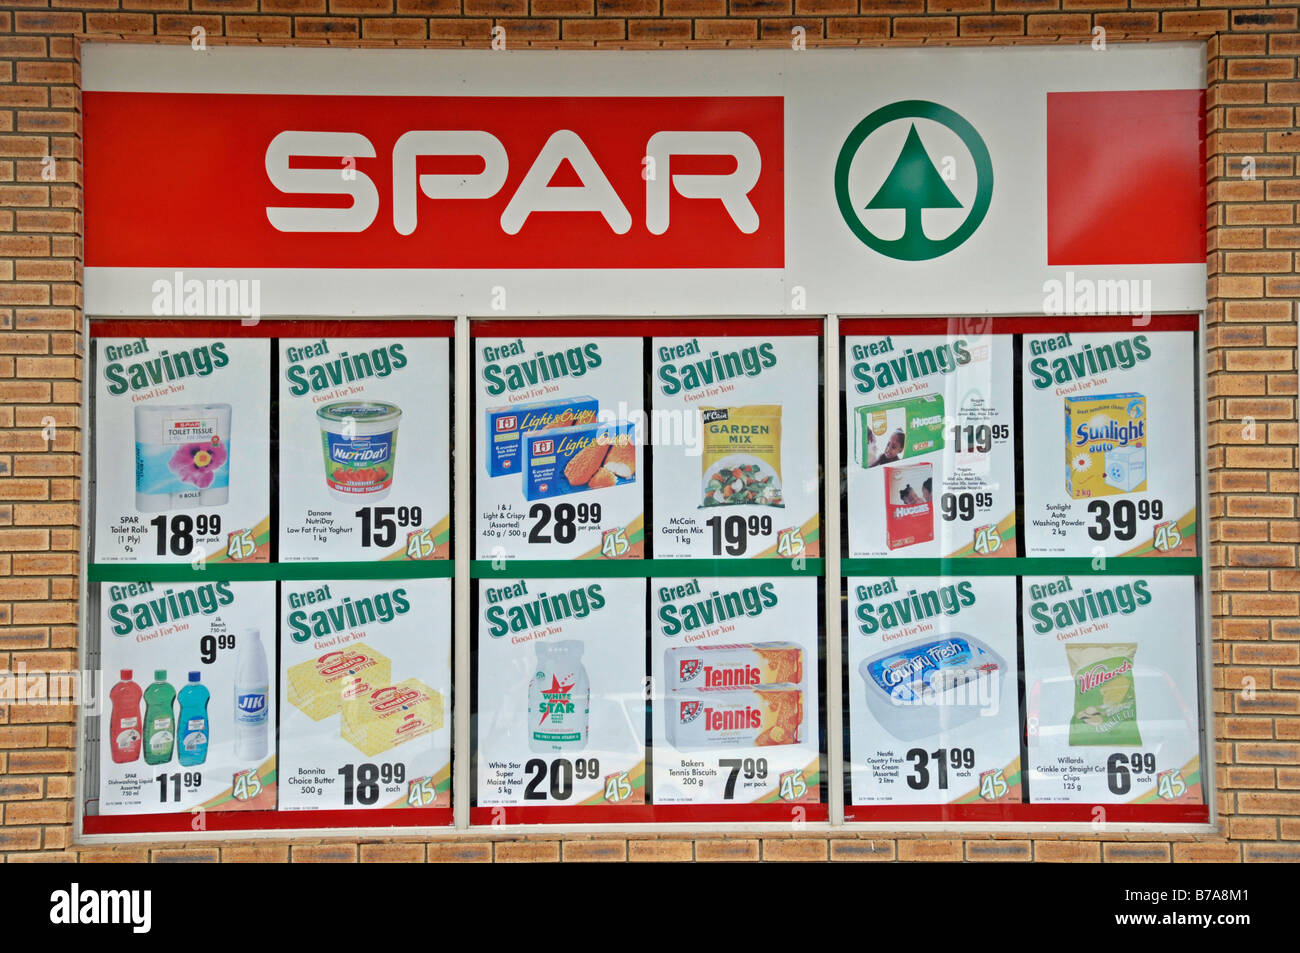 Promotional offers, Spar supermarket in Santa Lucia, South Africa, Africa Stock Photo